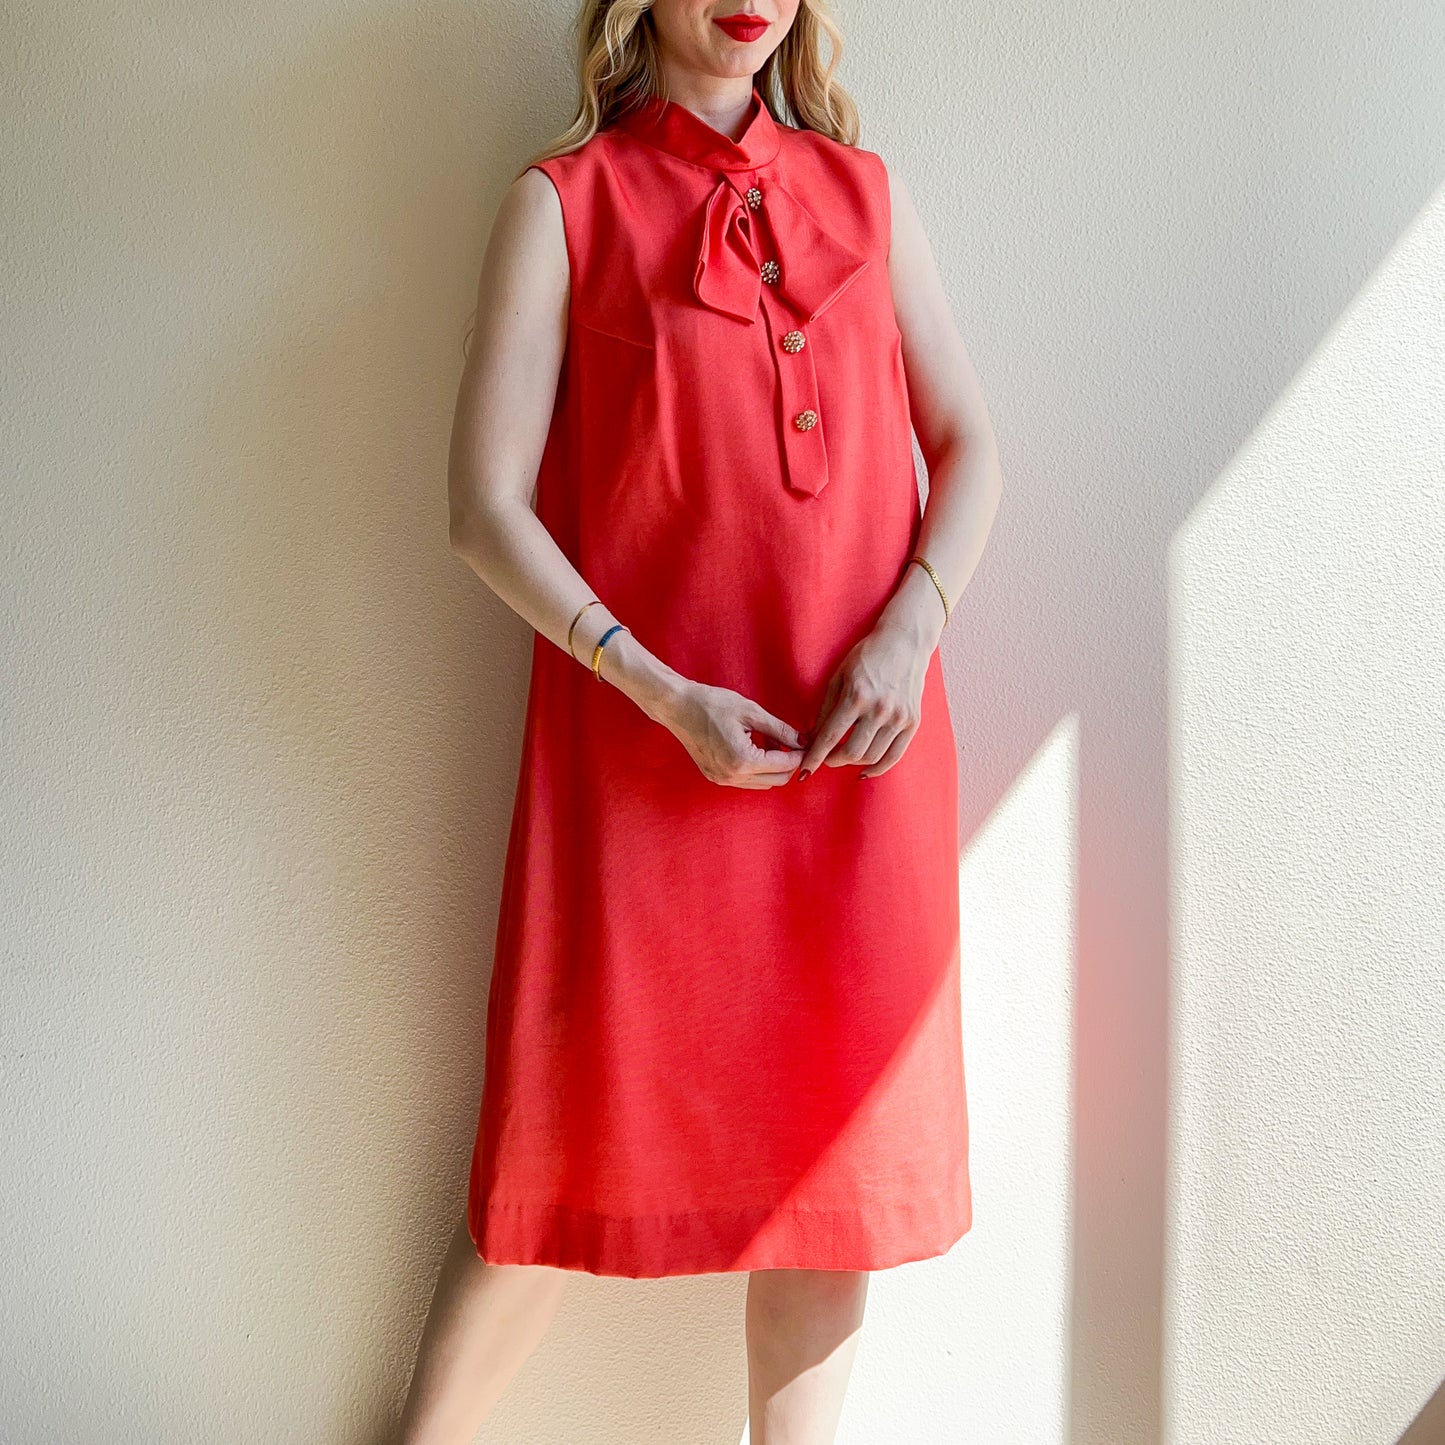 1960s Coral Shift Dress With Bow and Rhinestone Buttons (L/XL)